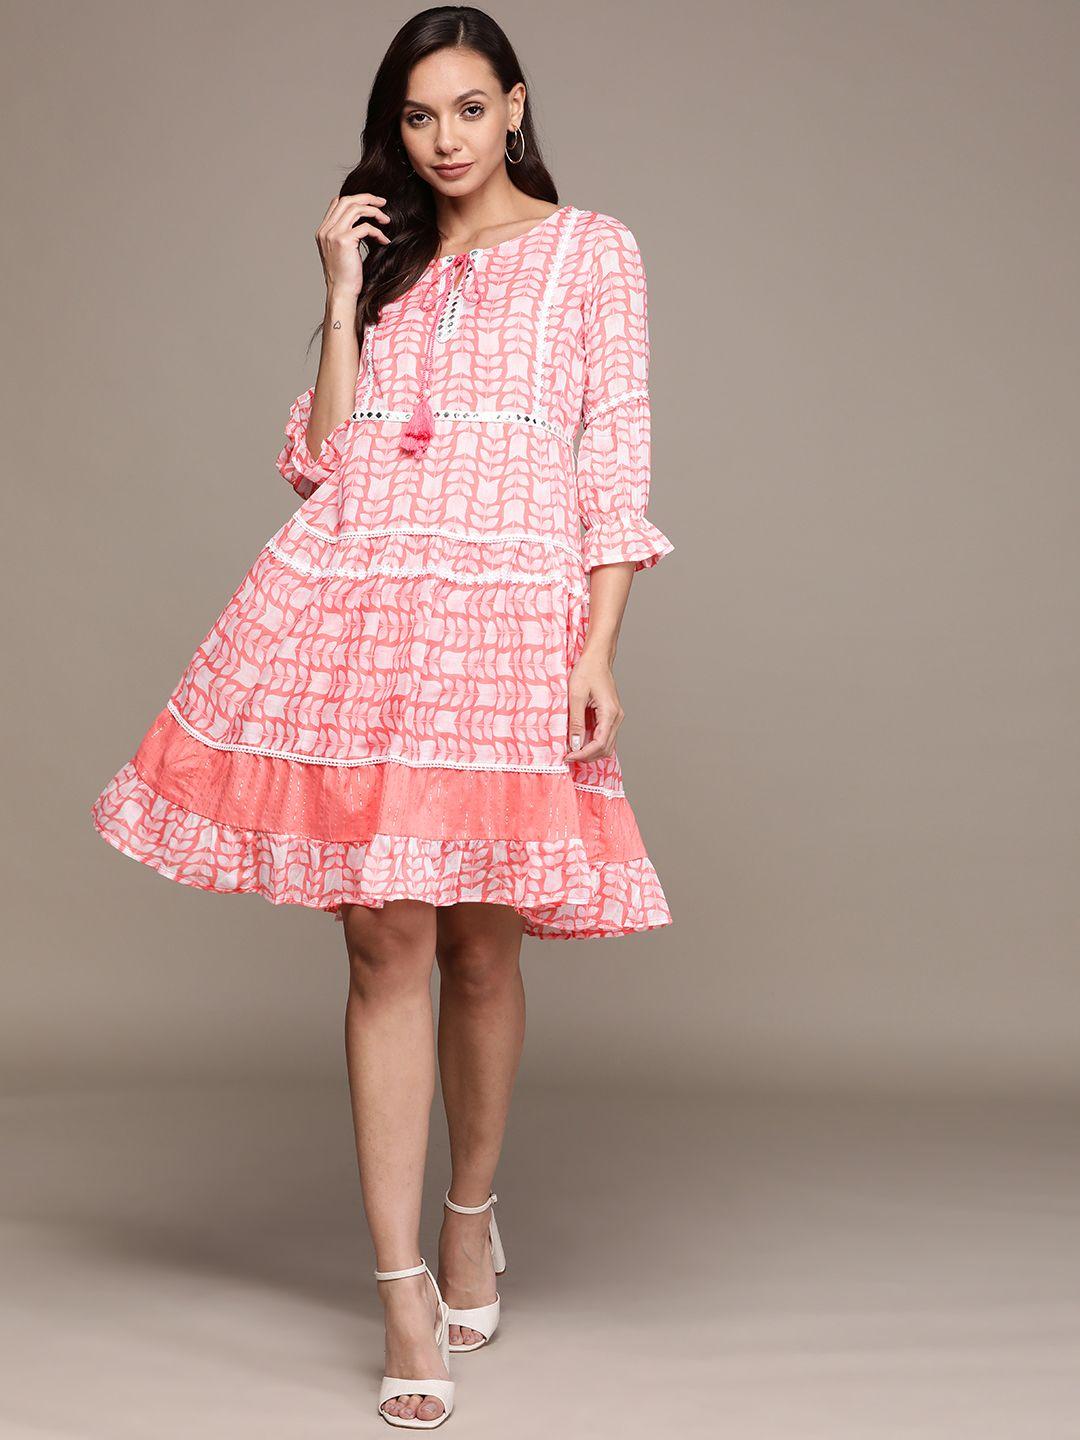 ishin coral pink & white ethnic motifs printed embellished tie-up neck cotton a-line dress